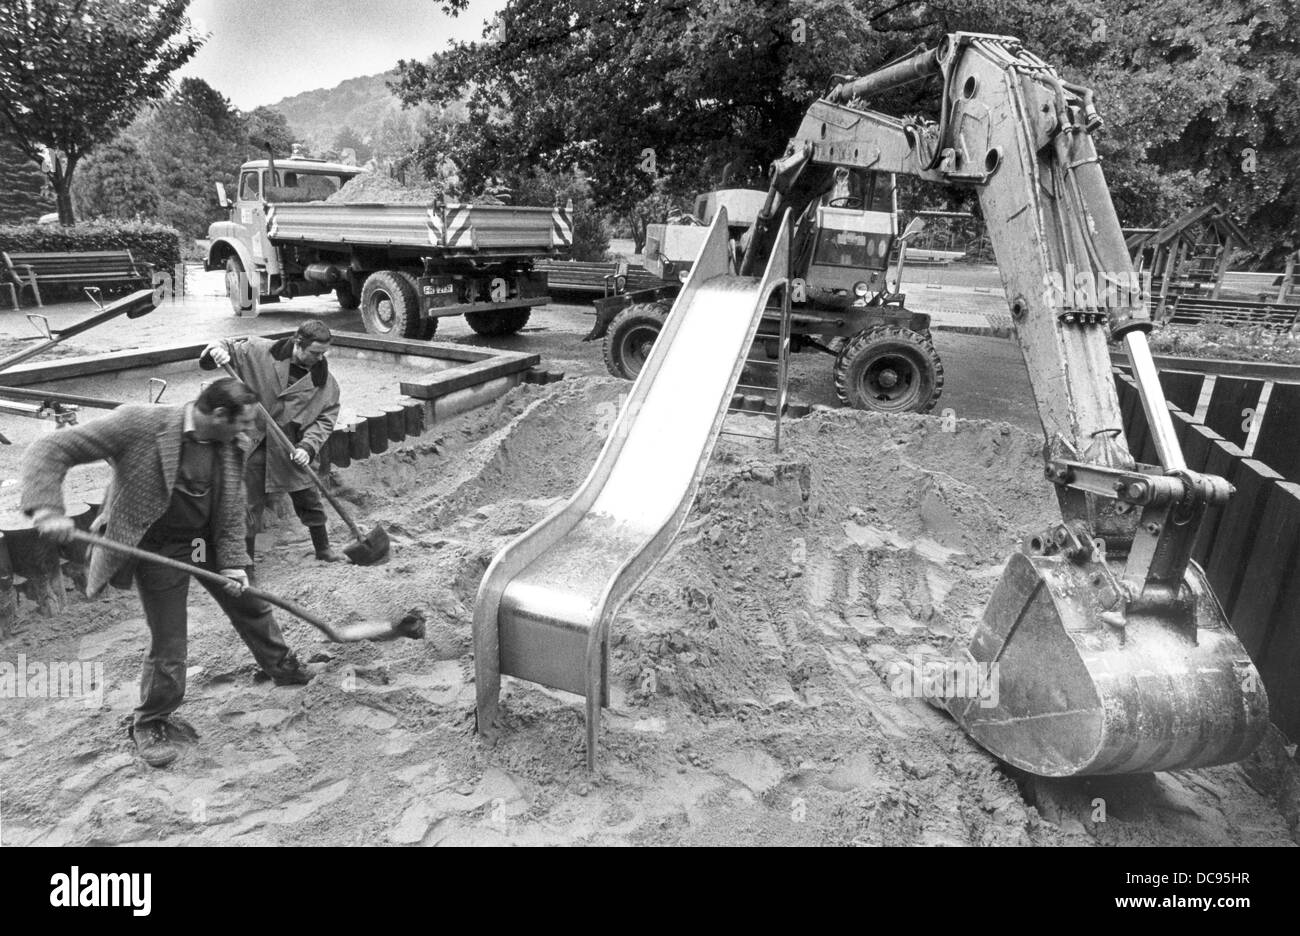 The sand, which might be contaminated by radiation, is exchanged on 125 playgrounds in Freiburg after the nuclear accident of Chernobyl (04.06.1986).  +++(c) dpa - Report+++ Stock Photo